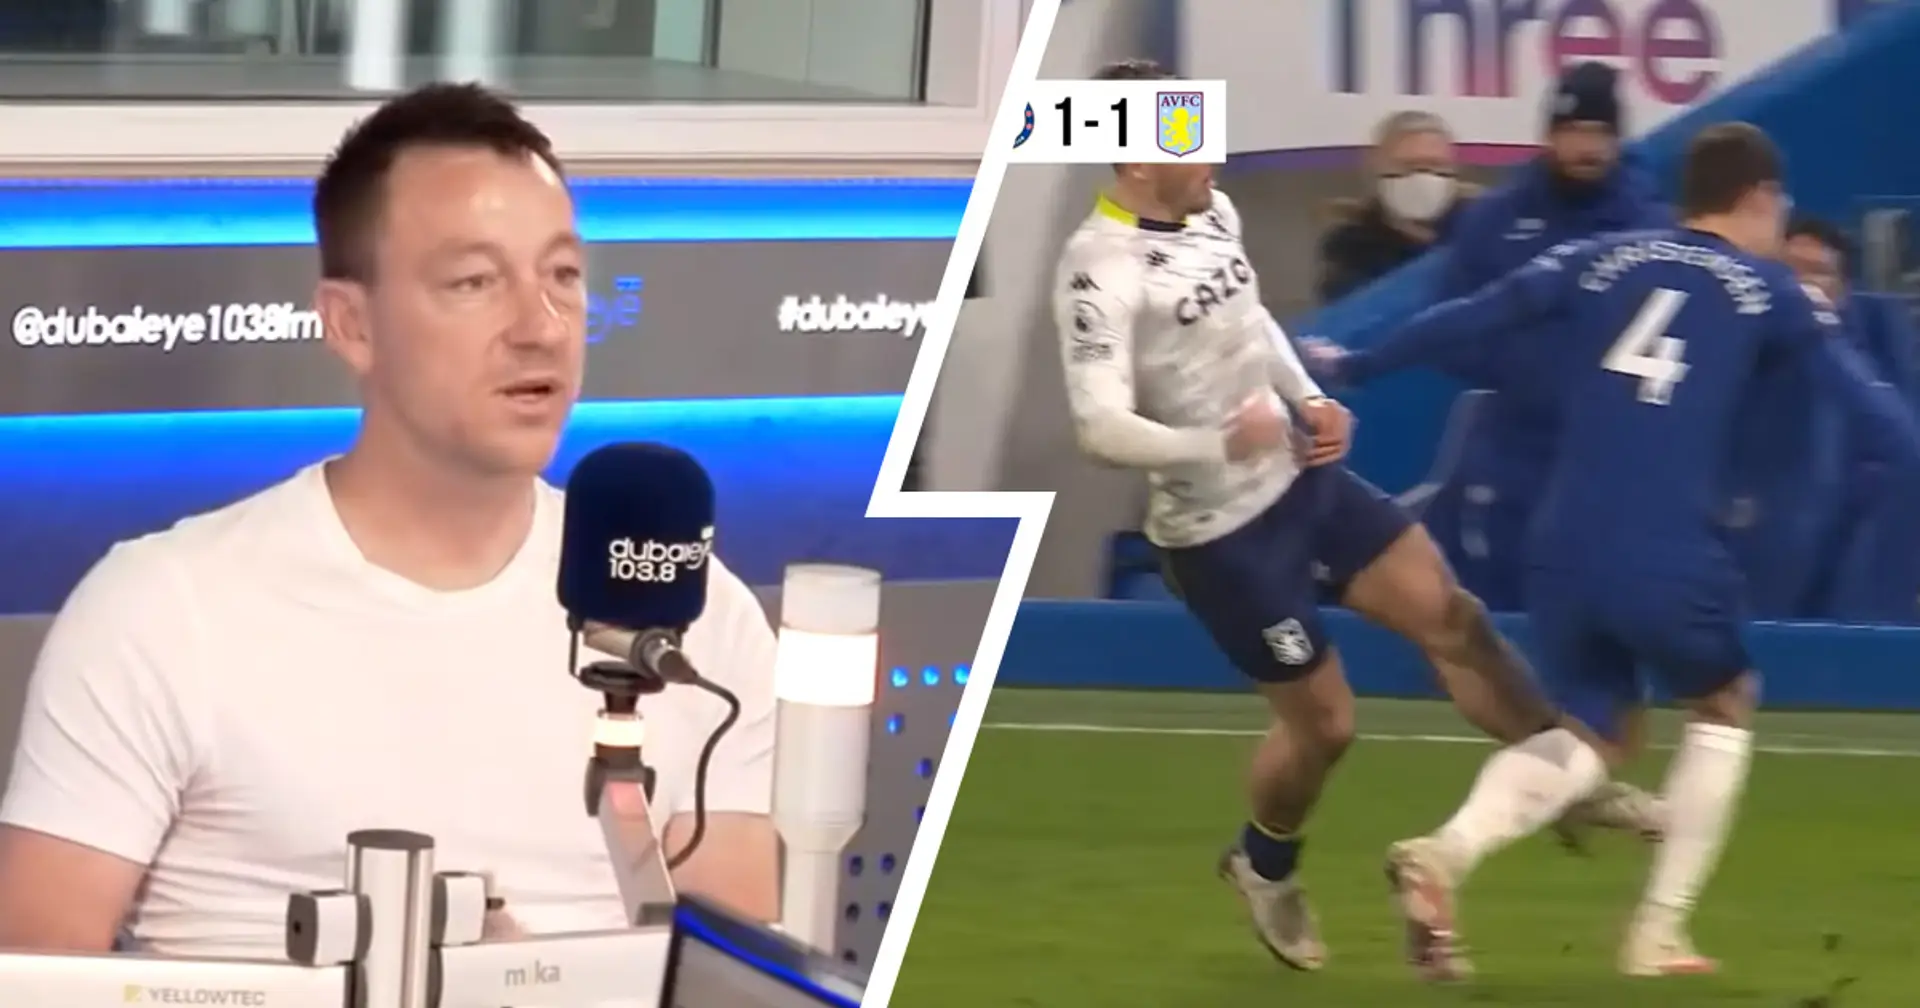 John Terry insists Christensen 'should've got up' after Grealish's foul in build-up to Aston Villa's equaliser